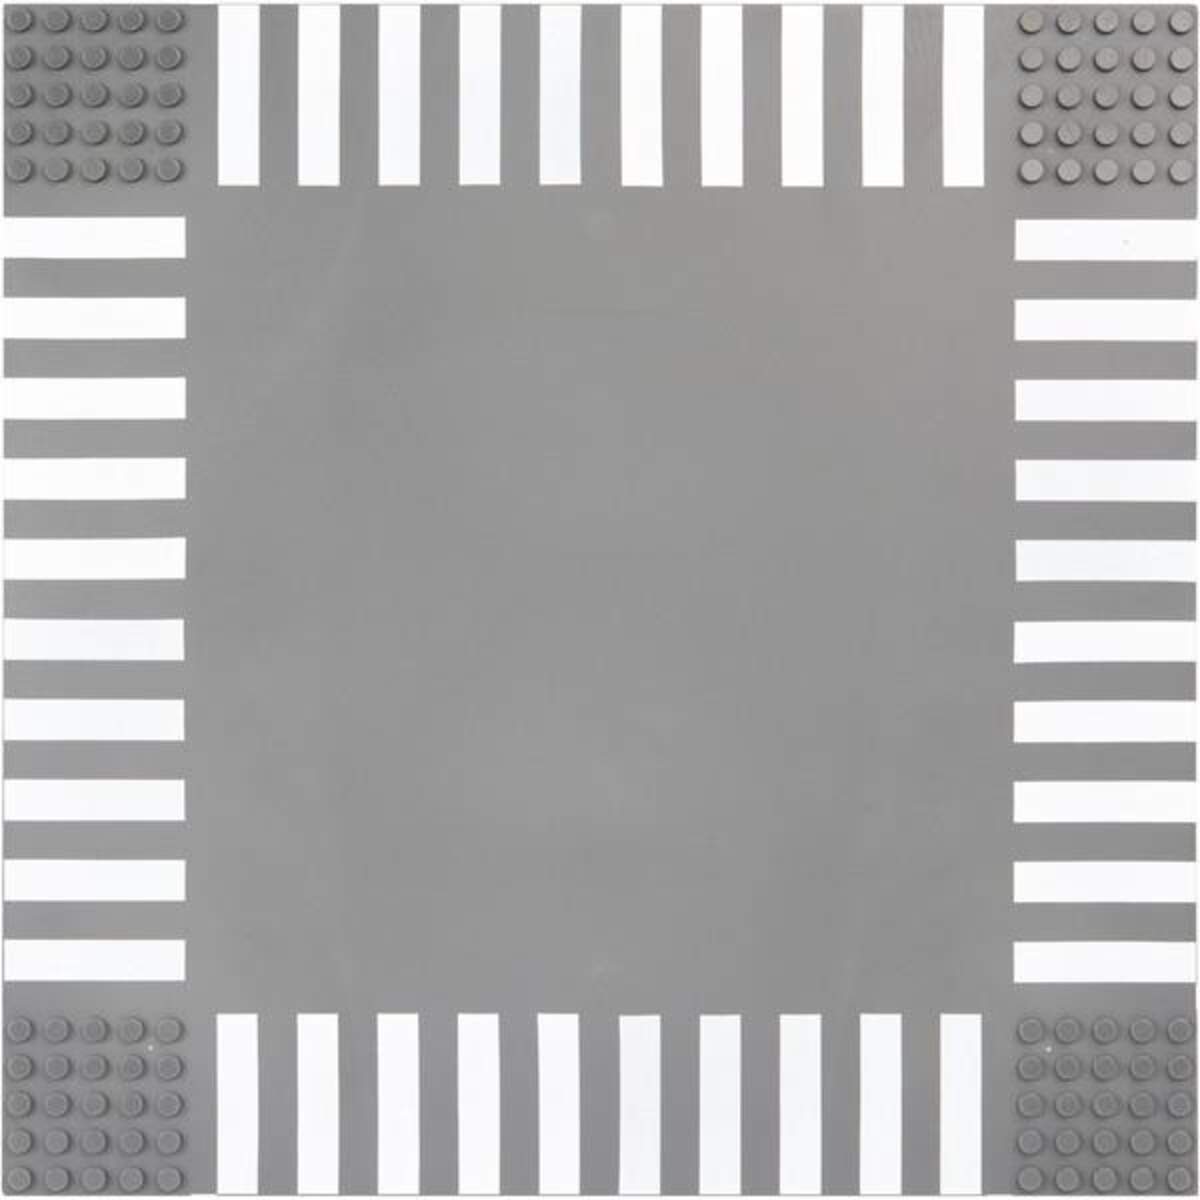 Open Bricks road plate 32x32 intersection gray 1